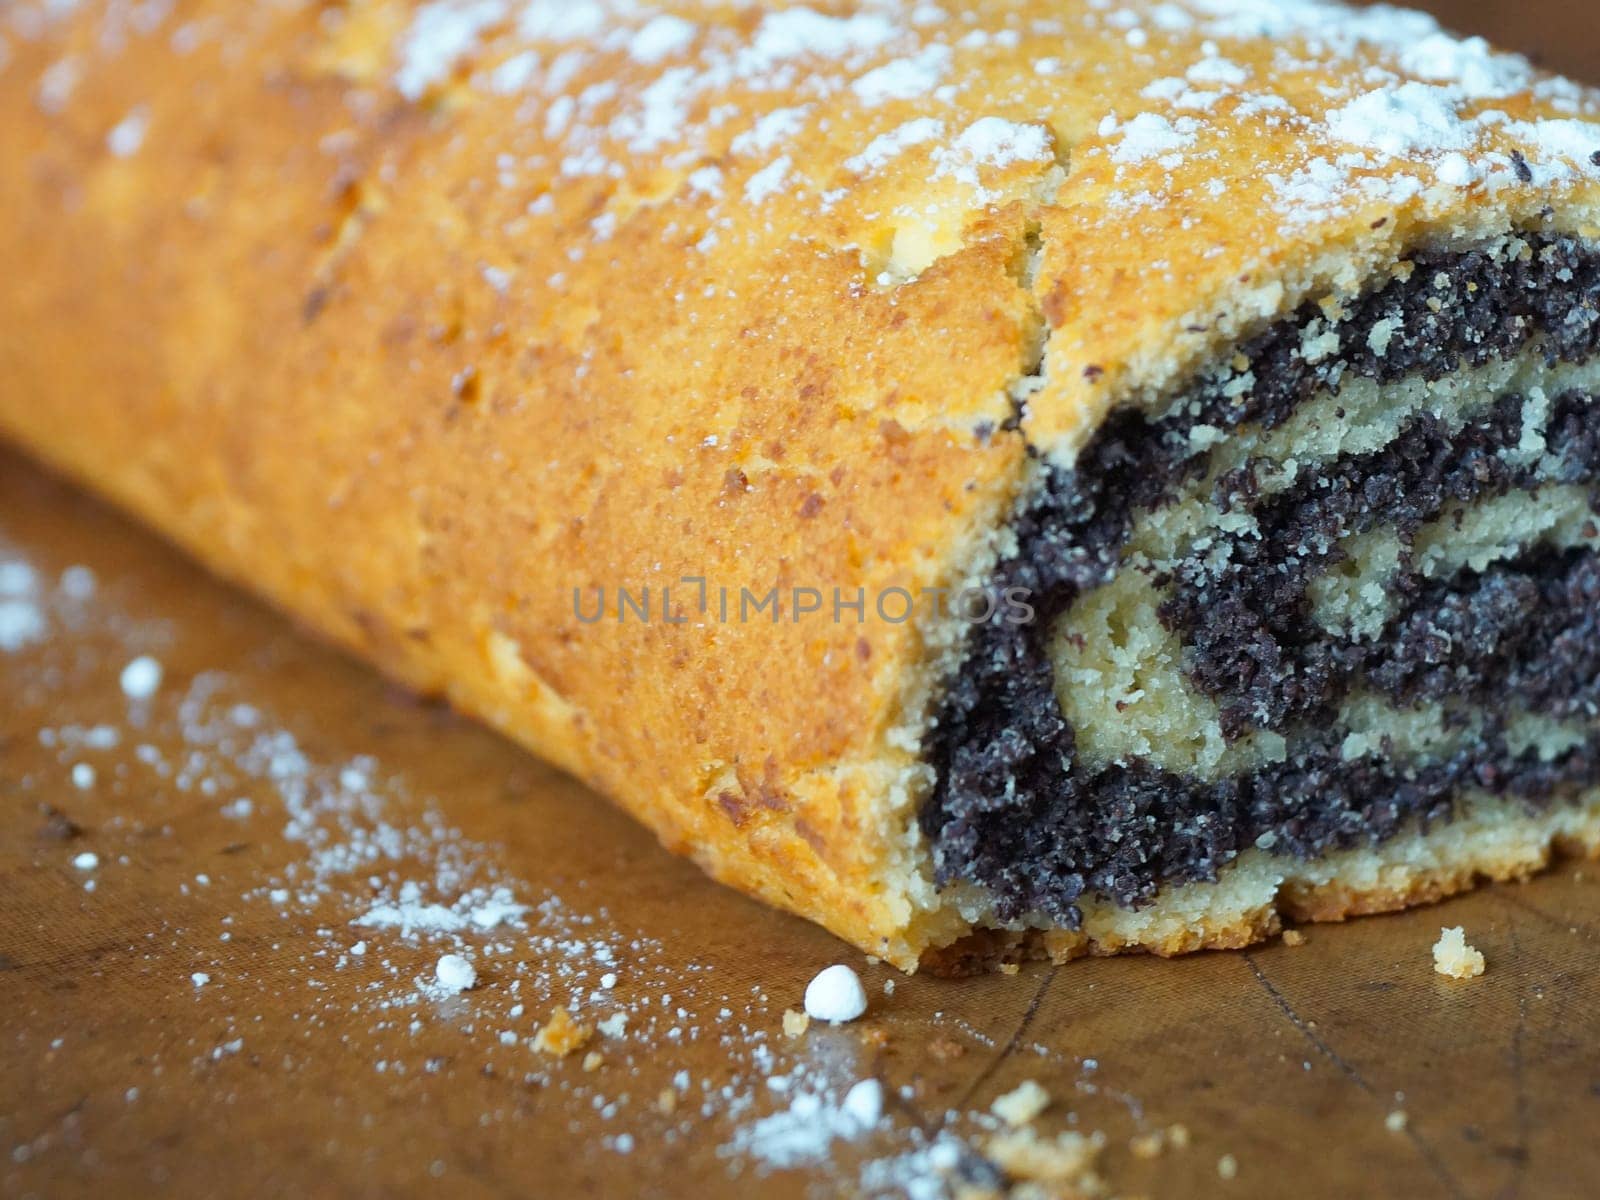 close-up of poppy seed roll sprinkled with powdered sugar by Annado